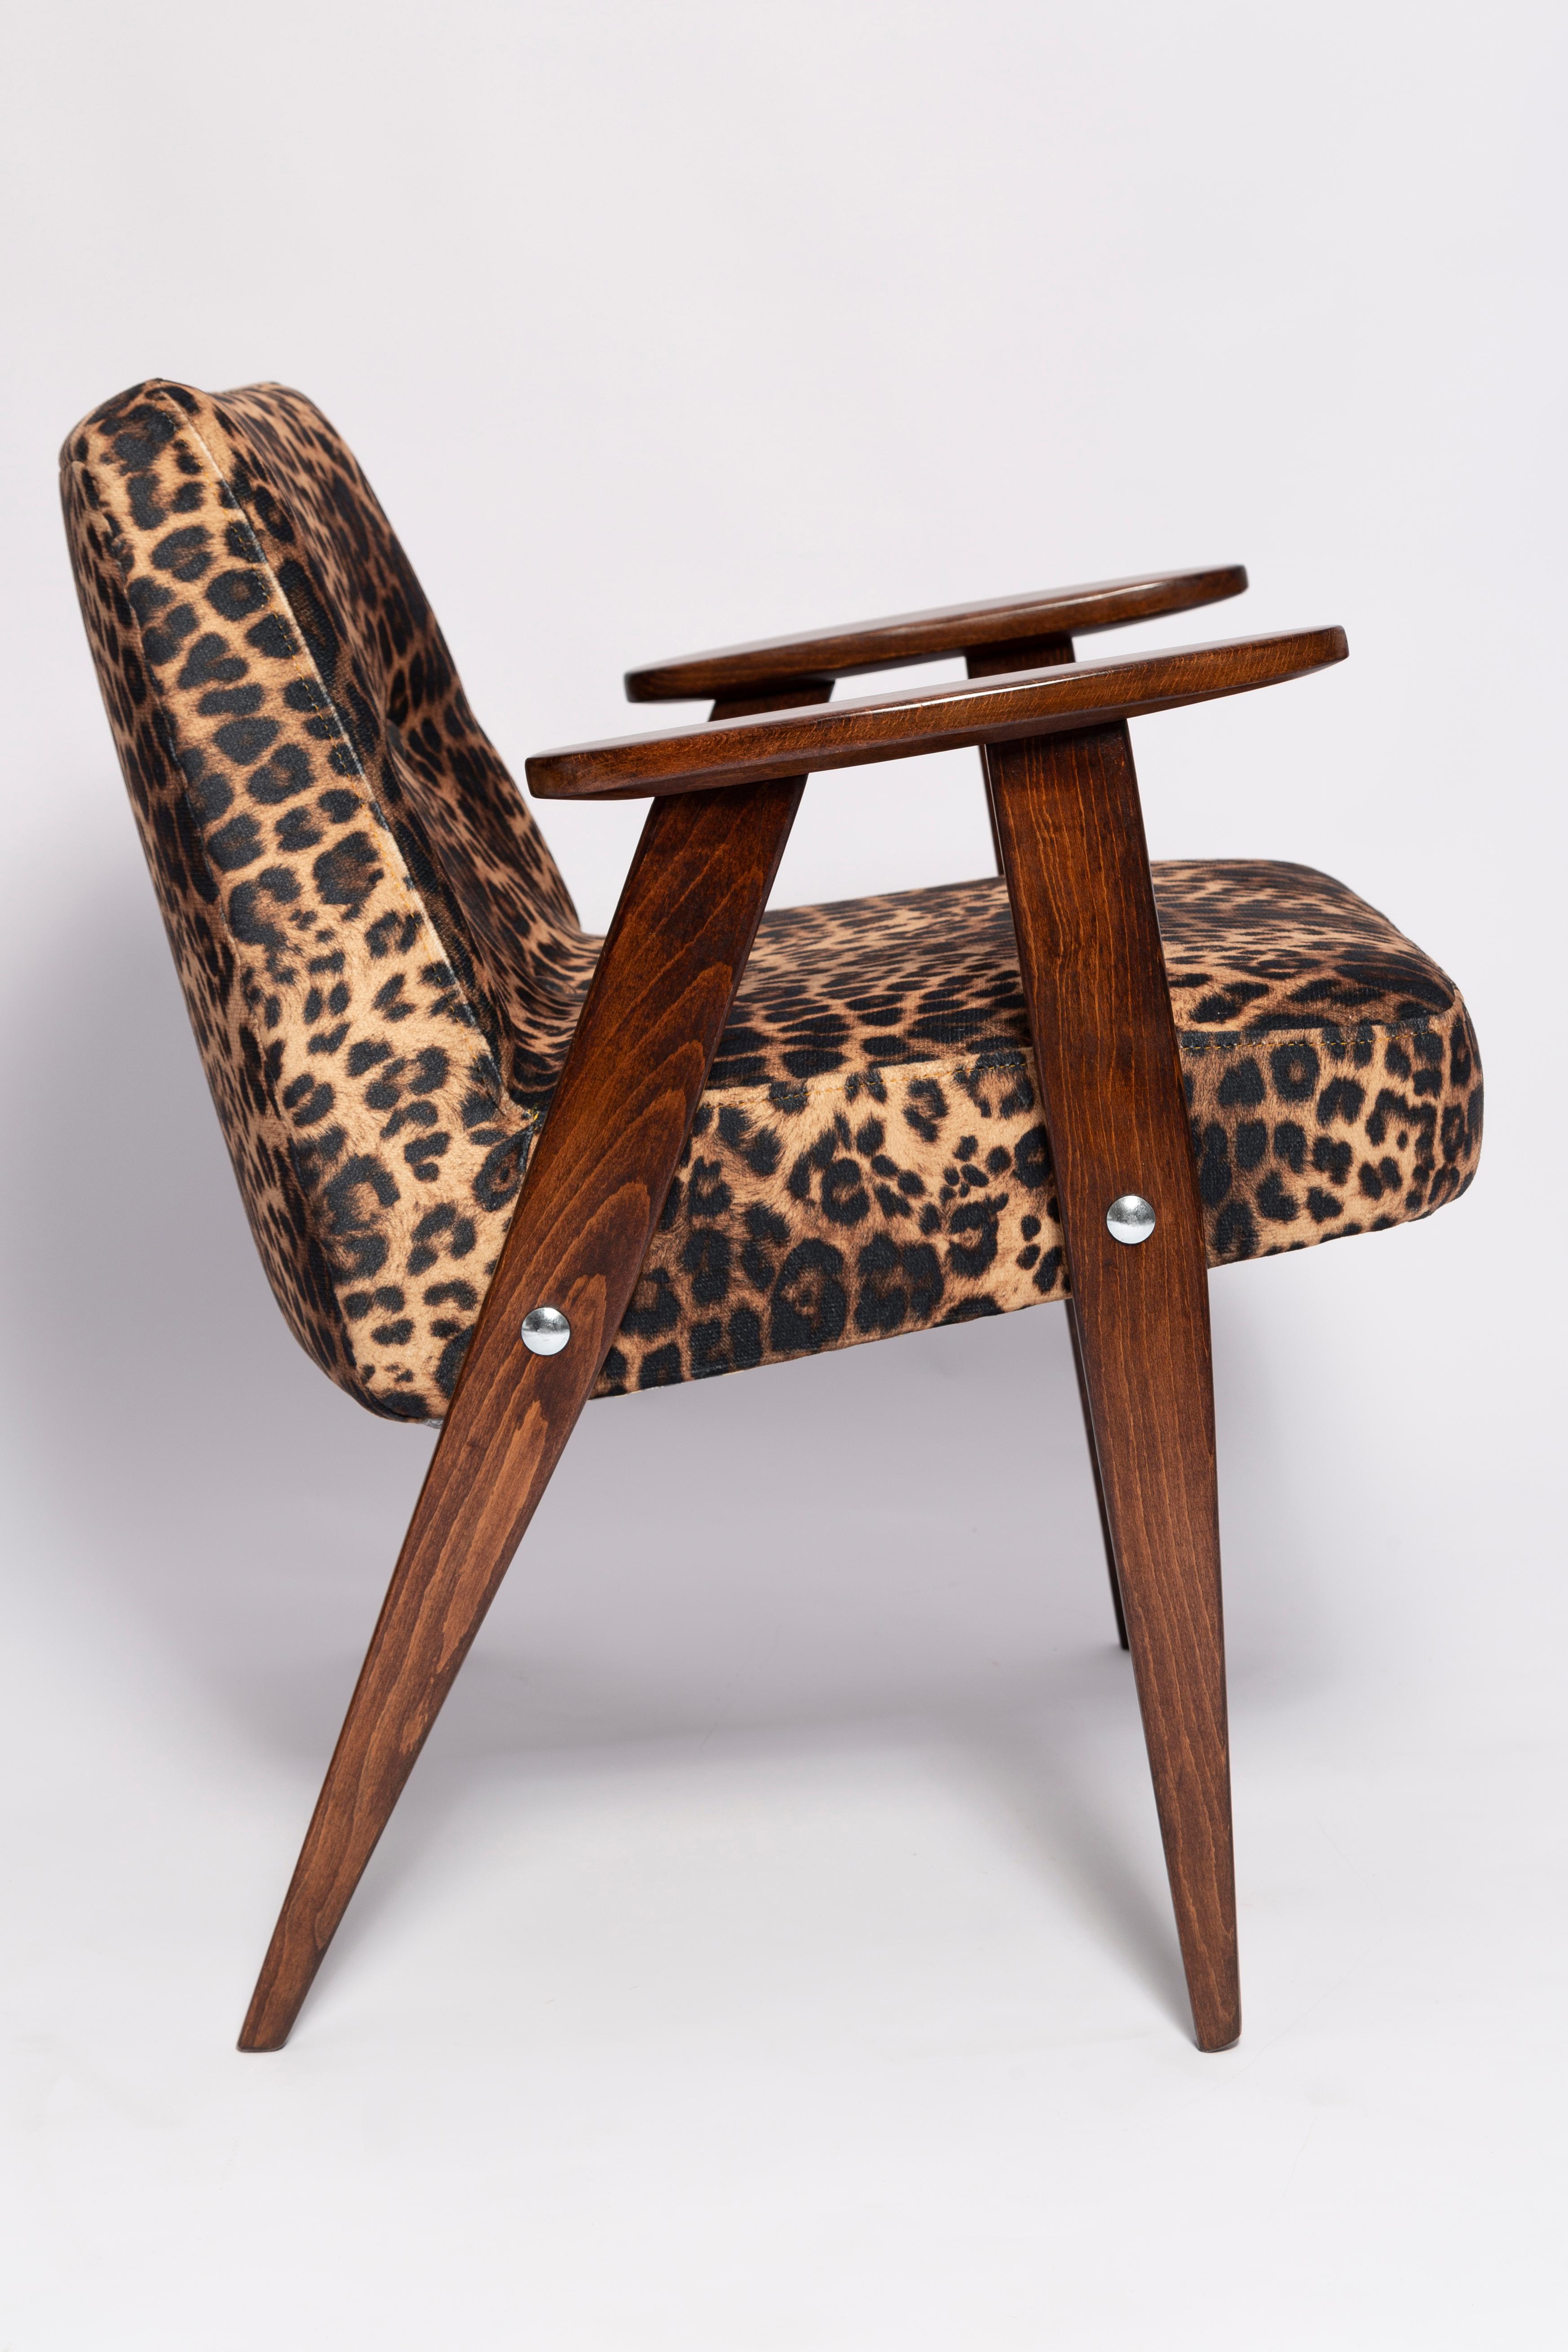 Textile Two Midcentury 366 Armchairs in Leopard Print Velvet, Jozef Chierowski, 1960s For Sale